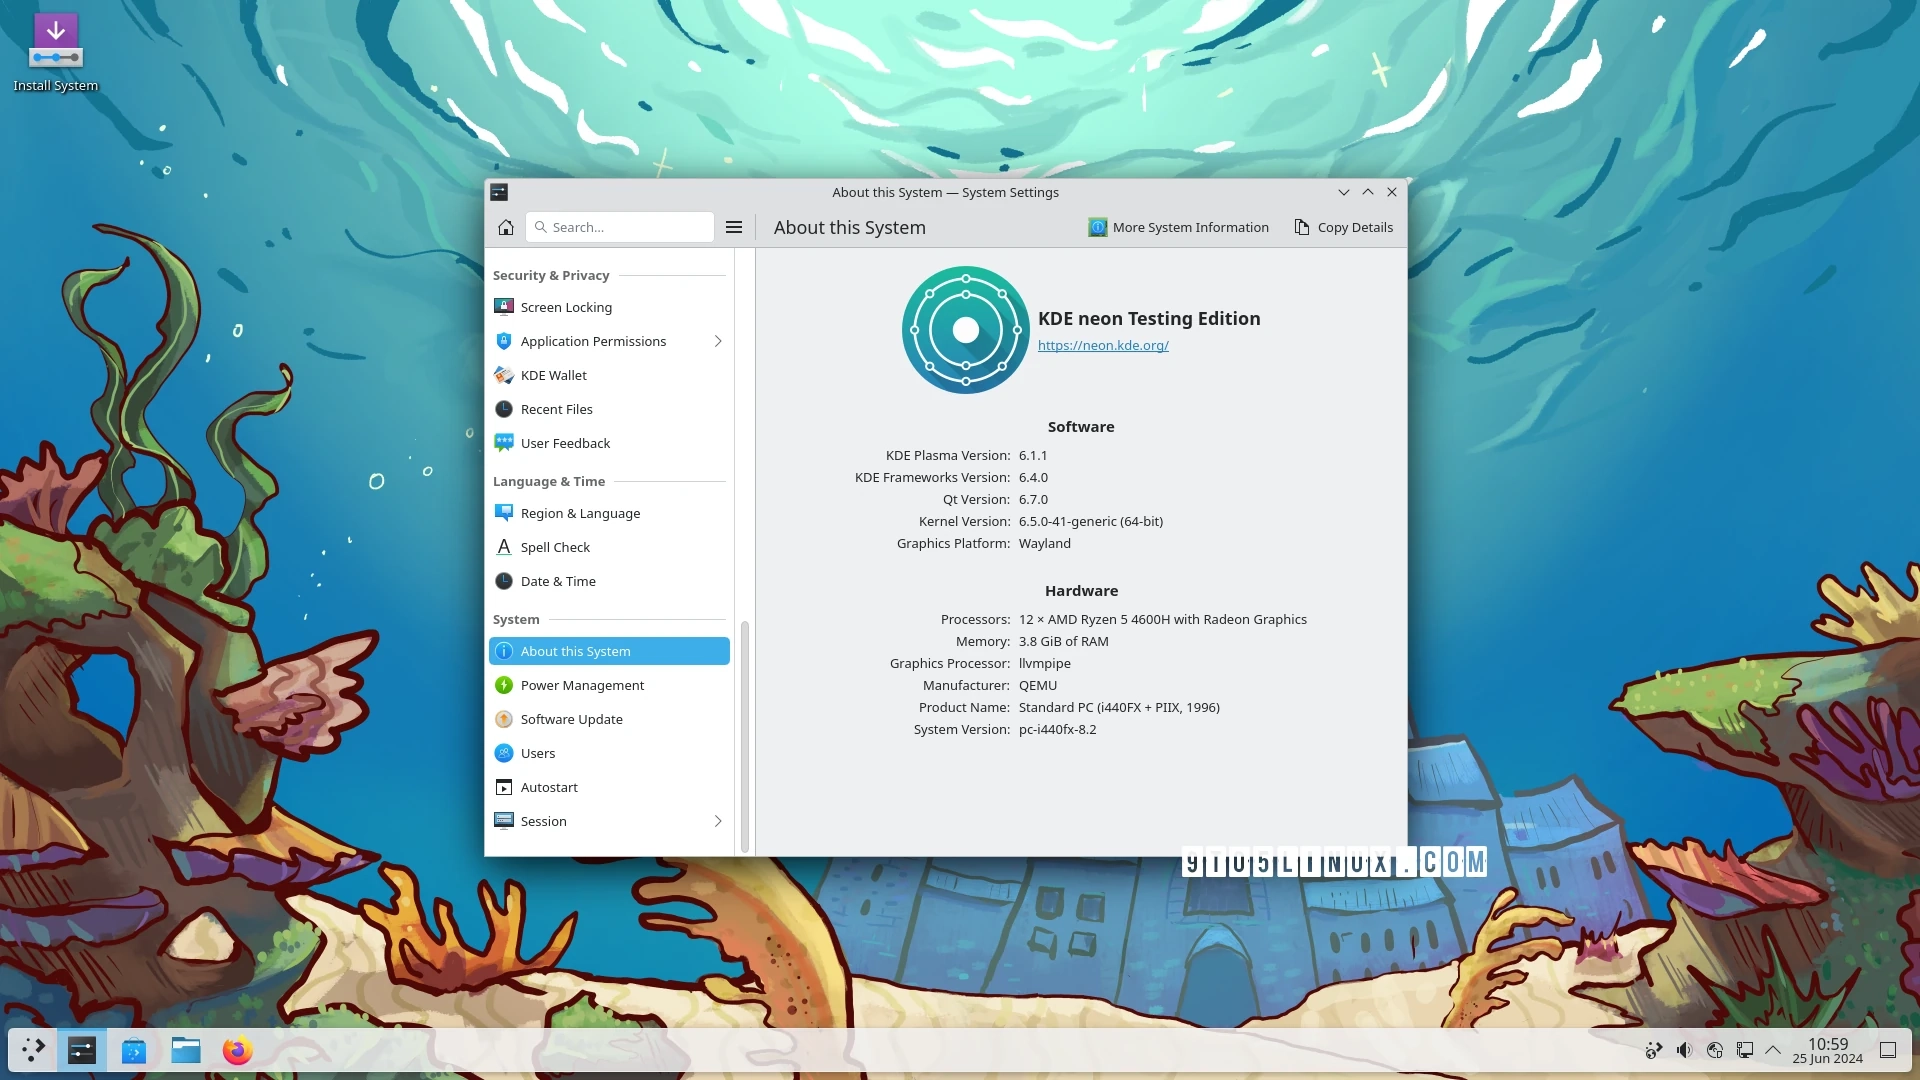 KDE Plasma 6.1.1: New Release Brings Crucial Bug Fixes and Enhancements